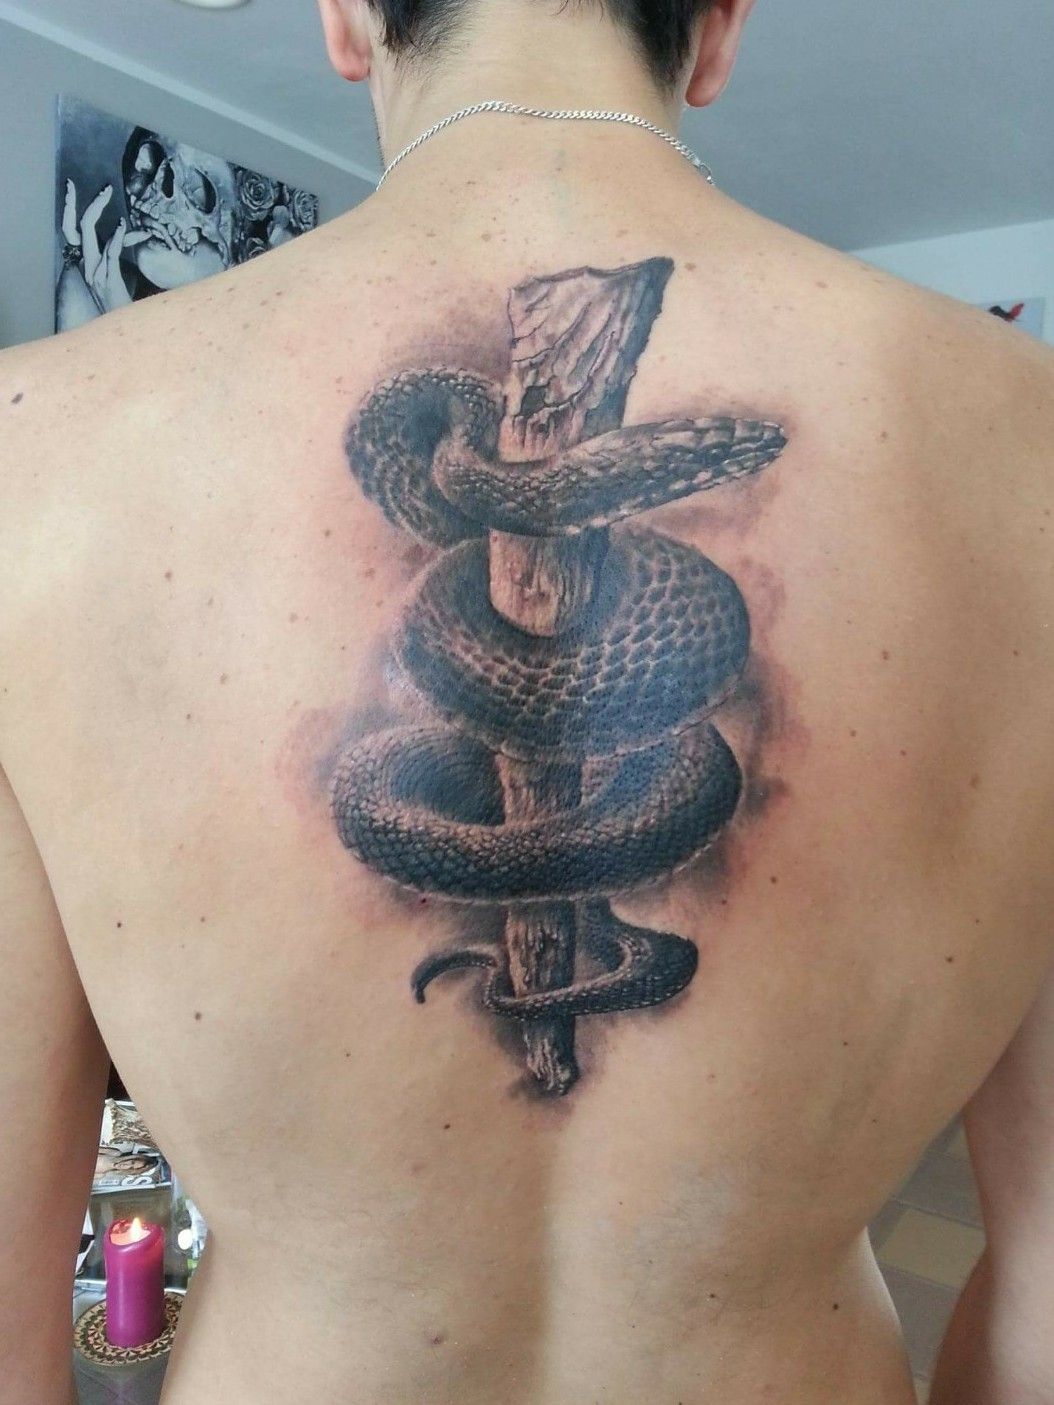 Tattoo uploaded by Vadim Nefjodov • 2.5h in one session. Rod of Asclepius. Ancient Greek god of Medicine. Snake is the black mamba. Done by Maris Pavlo in Riga, Latvia. • Tattoodo